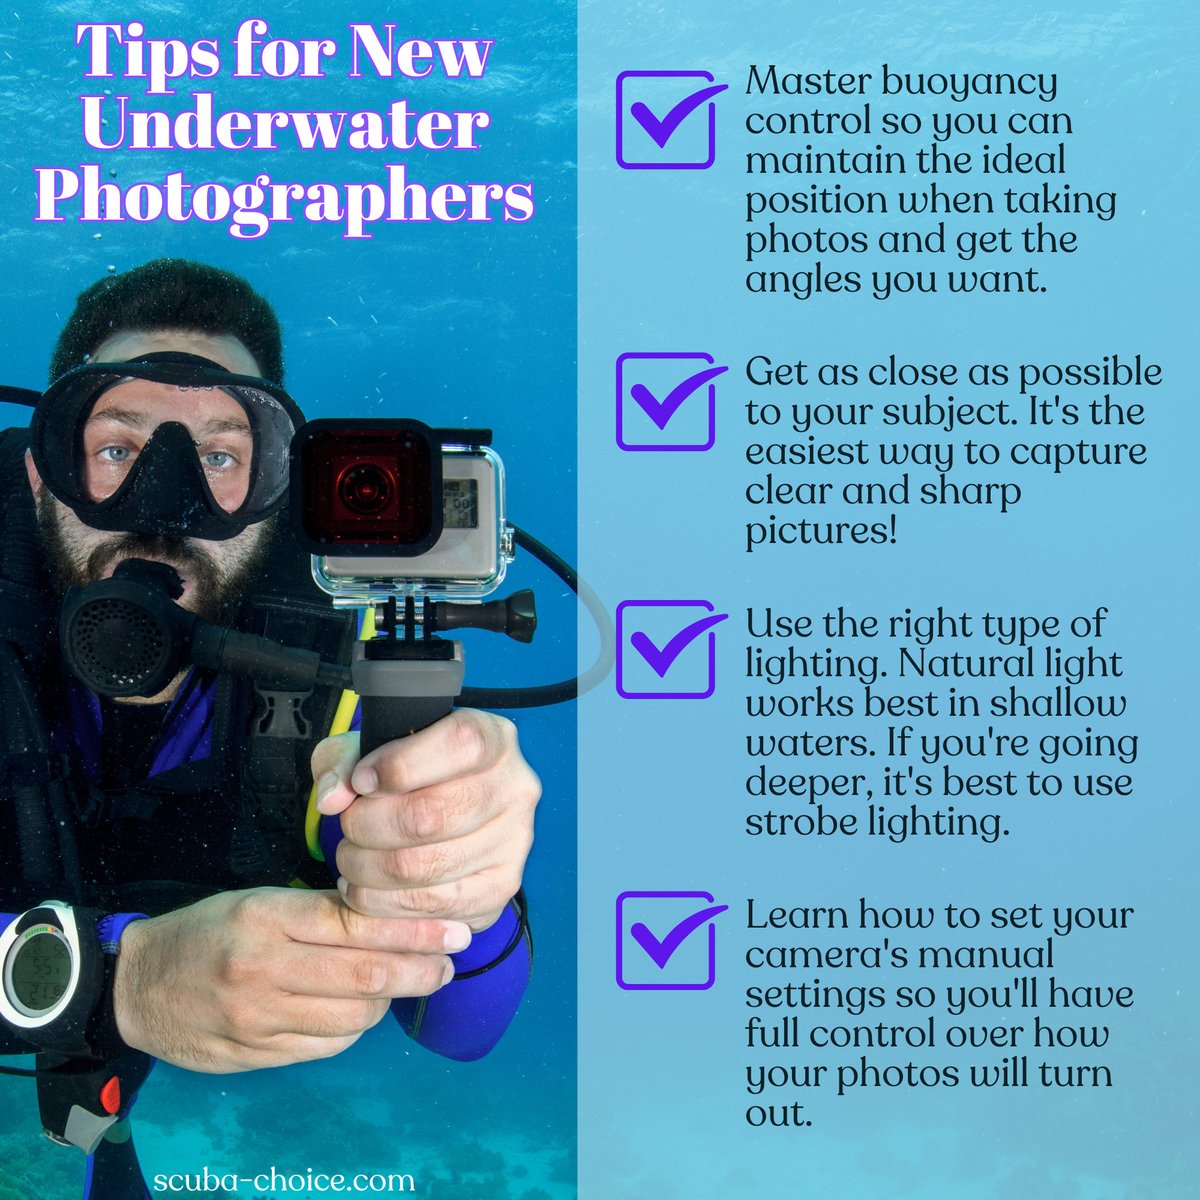 Ready to foray into the world of underwater photography? Here are some tips that will help
you take the best possible pictures.

#DivePhotographer
#UnderseaPhotography
#OceanLifeLens